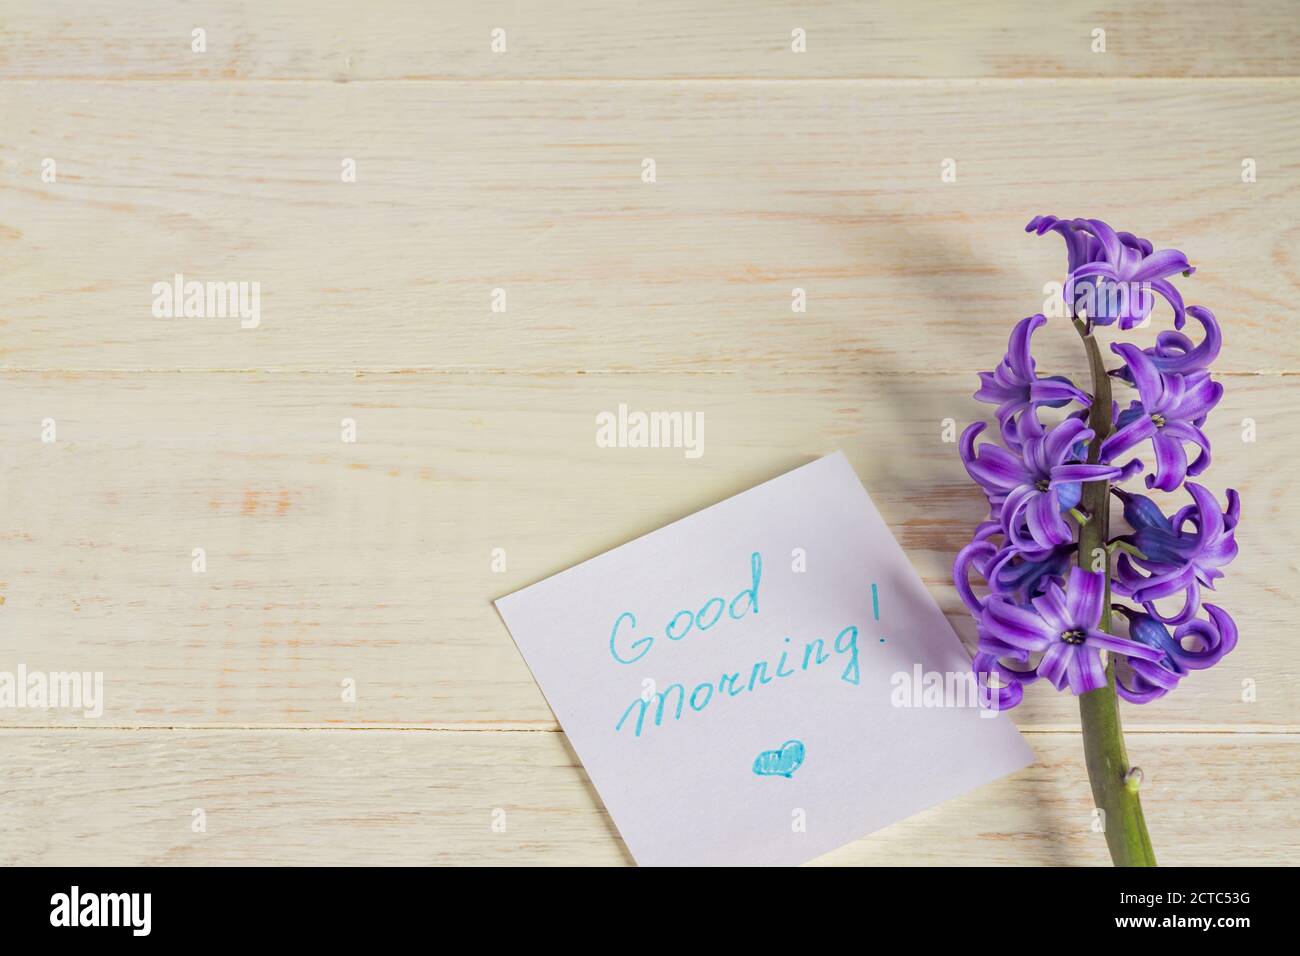 Good morning friday on white paper texture and background. | CanStock